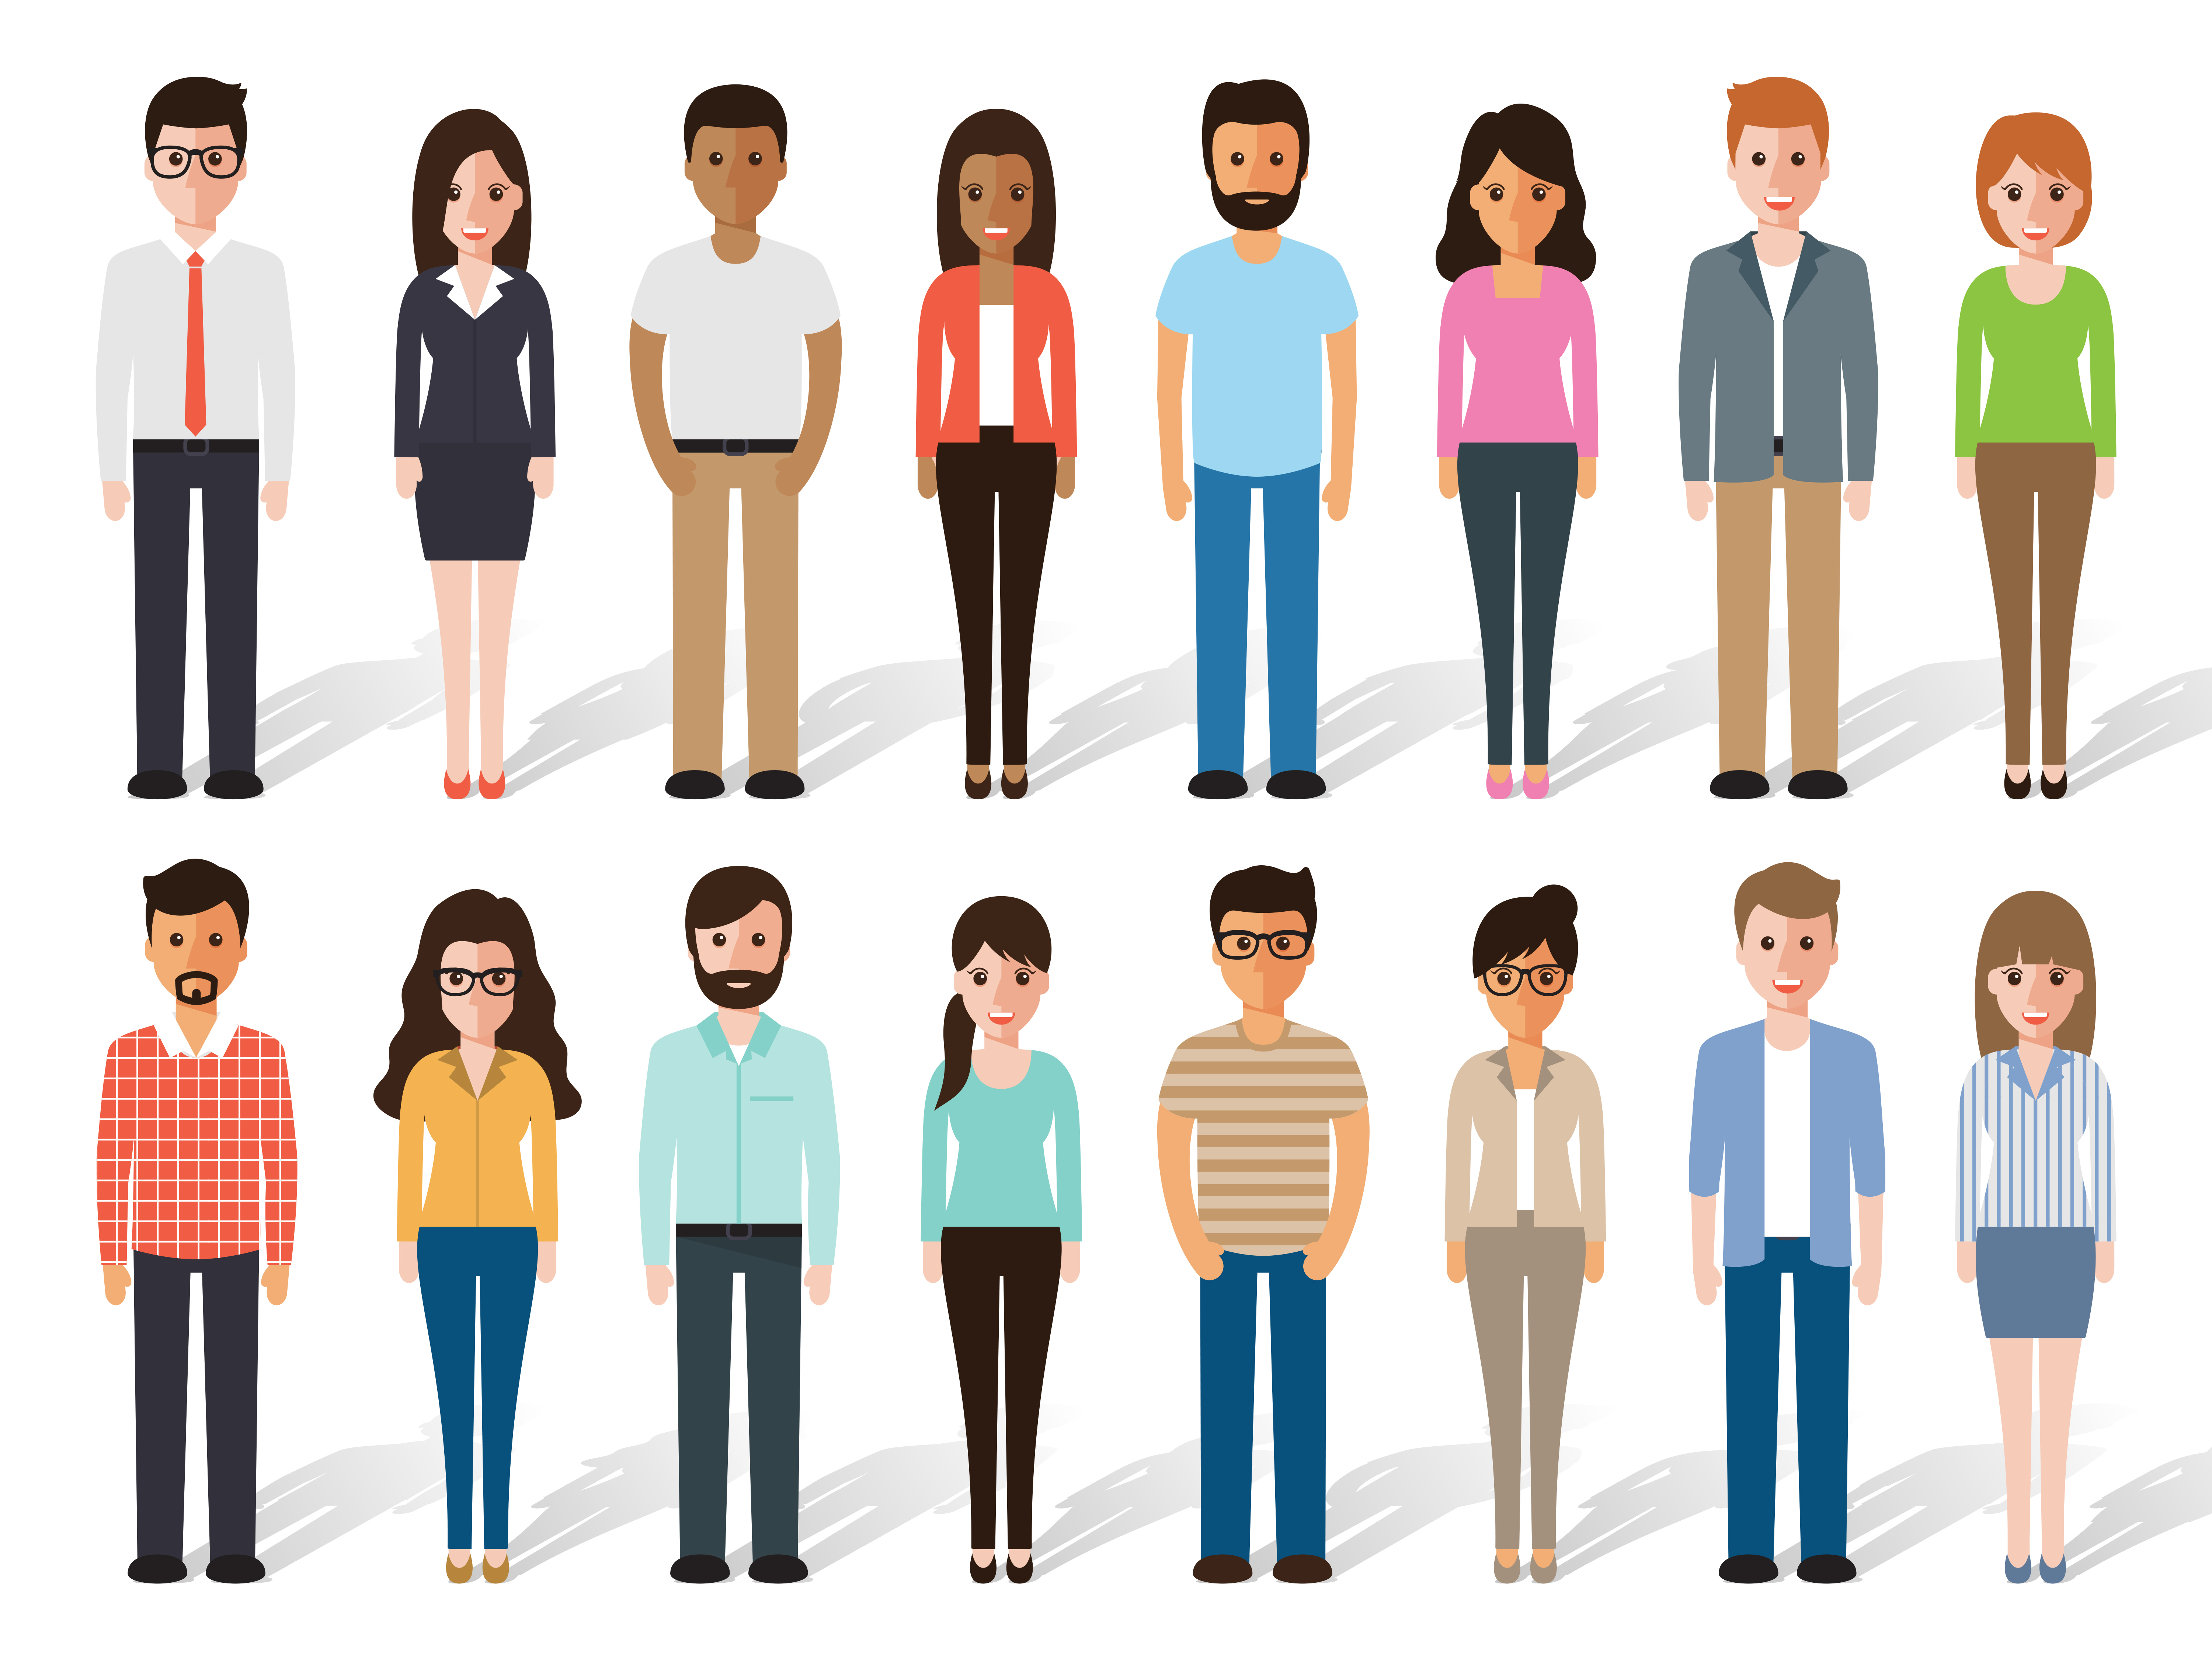 How to create Buyer Personas for your business